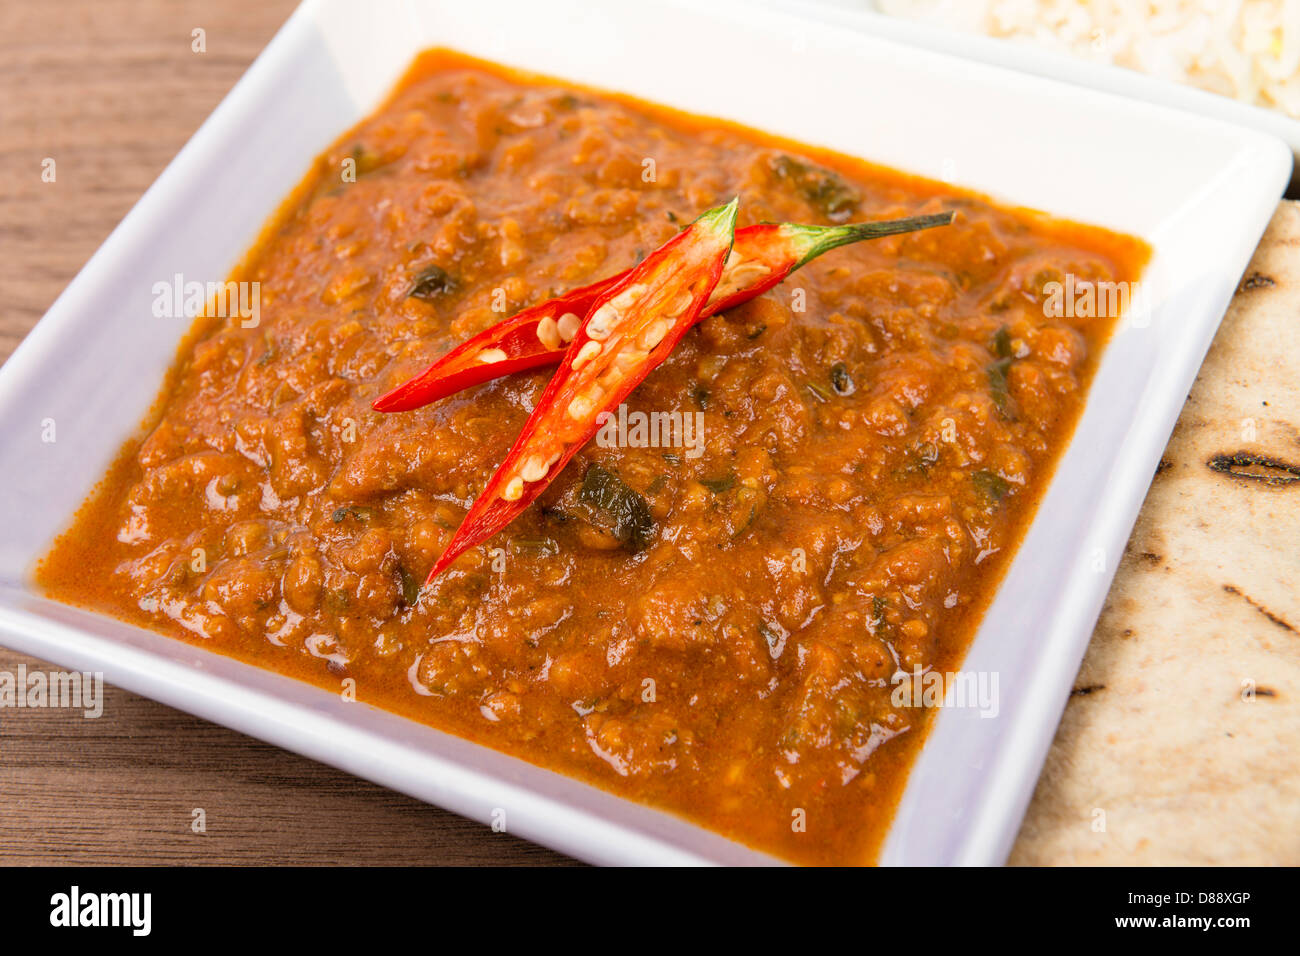 Keema Madras - Minced lamb curry garnished with chilies and served with rice and chapatis. Stock Photo